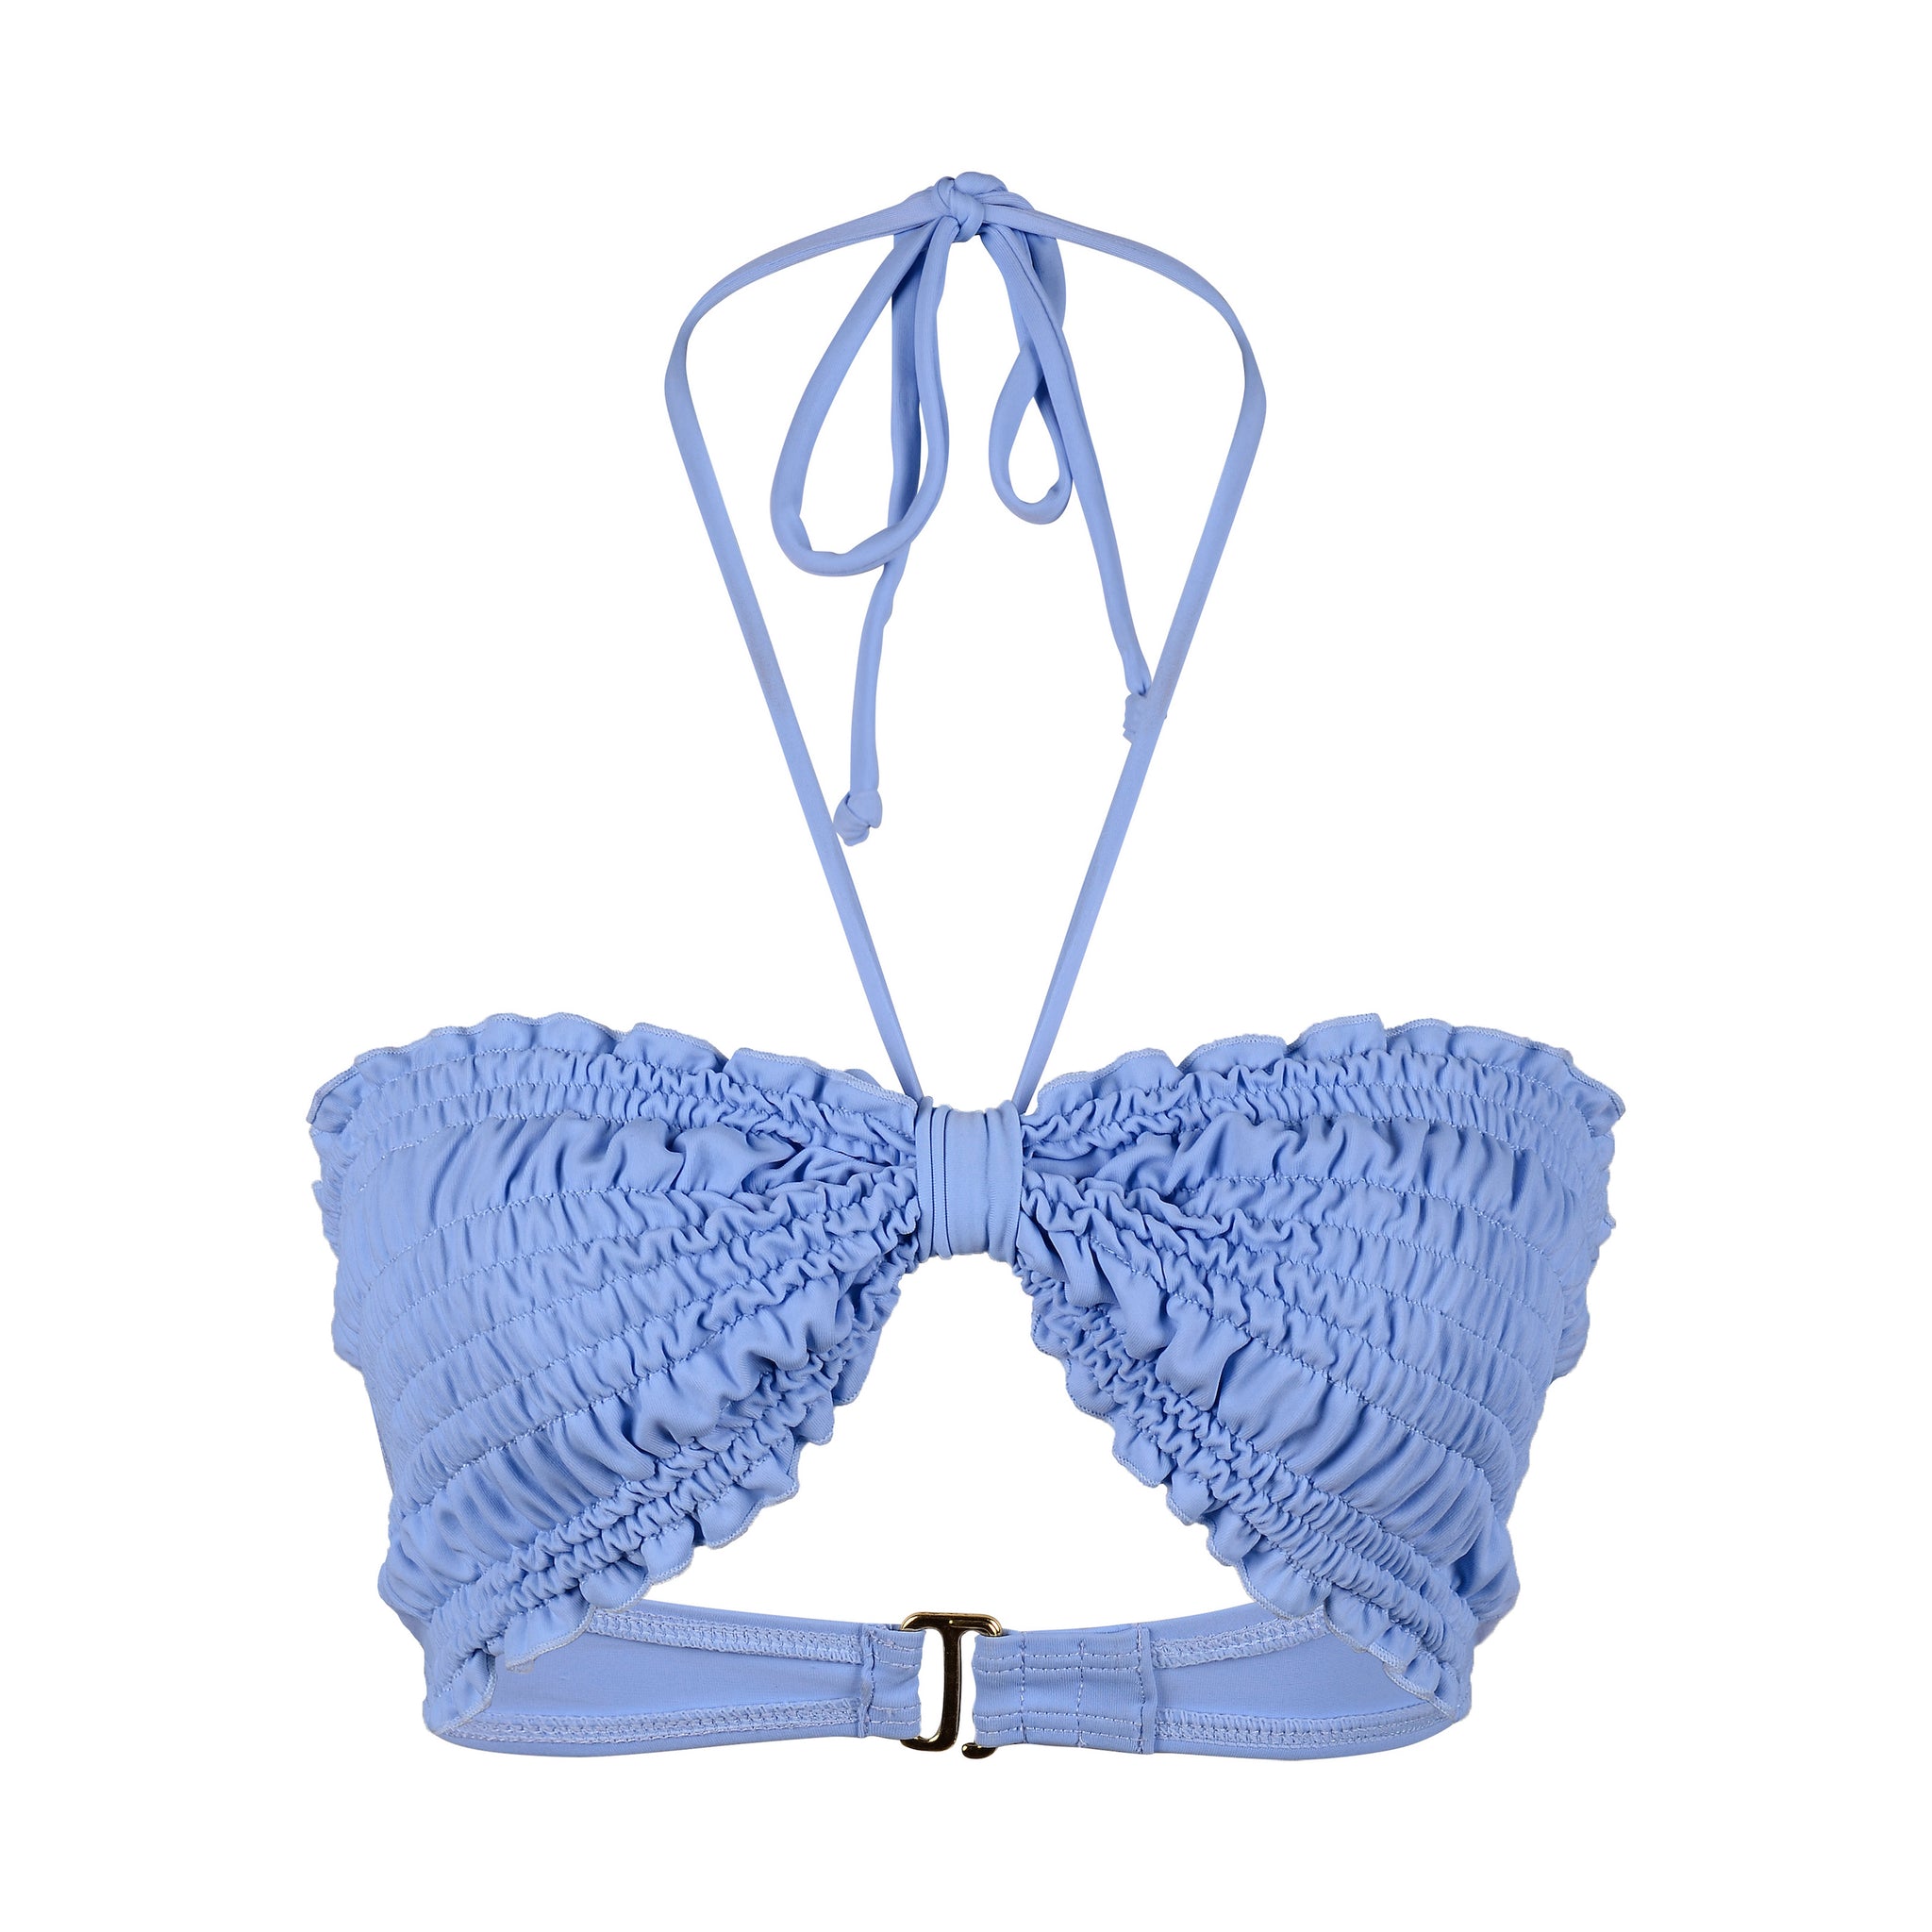 ZIEMIA TOP (SKY BLUE) - Swimwear THIS IS A LOVE SONG